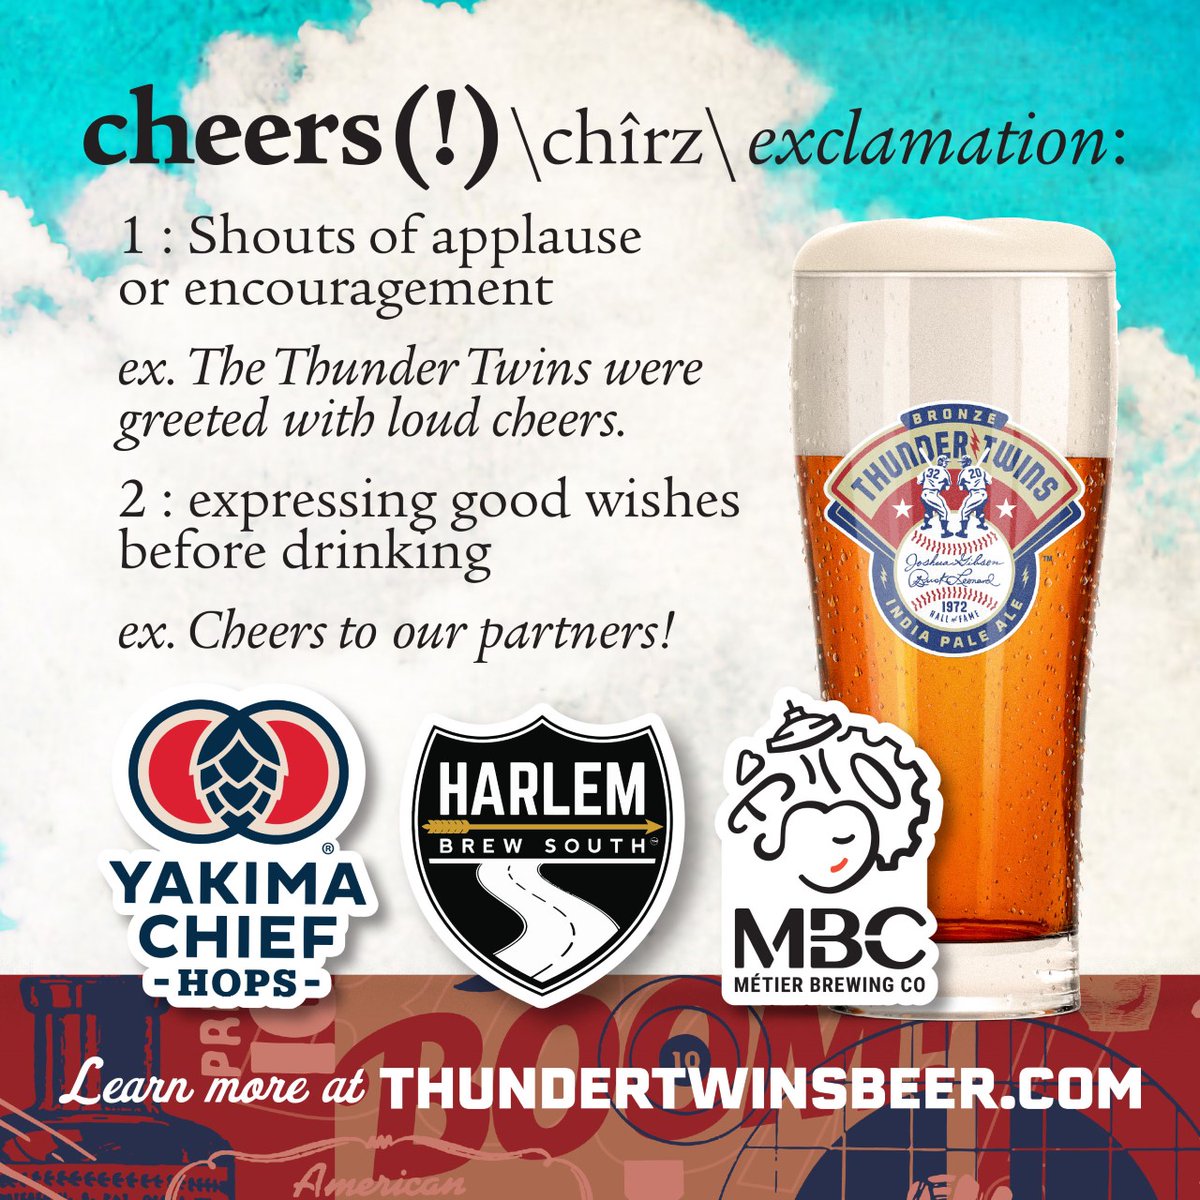 Bronze Thunder Twins IPA in May! An all-star collab with @BL_ASHE, @HarlemBrewing, @MetierBrewing @YakimaChief. Get the recipe & gear for your craft #brewery at thundertwinsbeer.com #craftbeer #ThunderTwinsBeer #JoshGibson #BuckLeonard 
#IPA #Hops #NegroLeagues